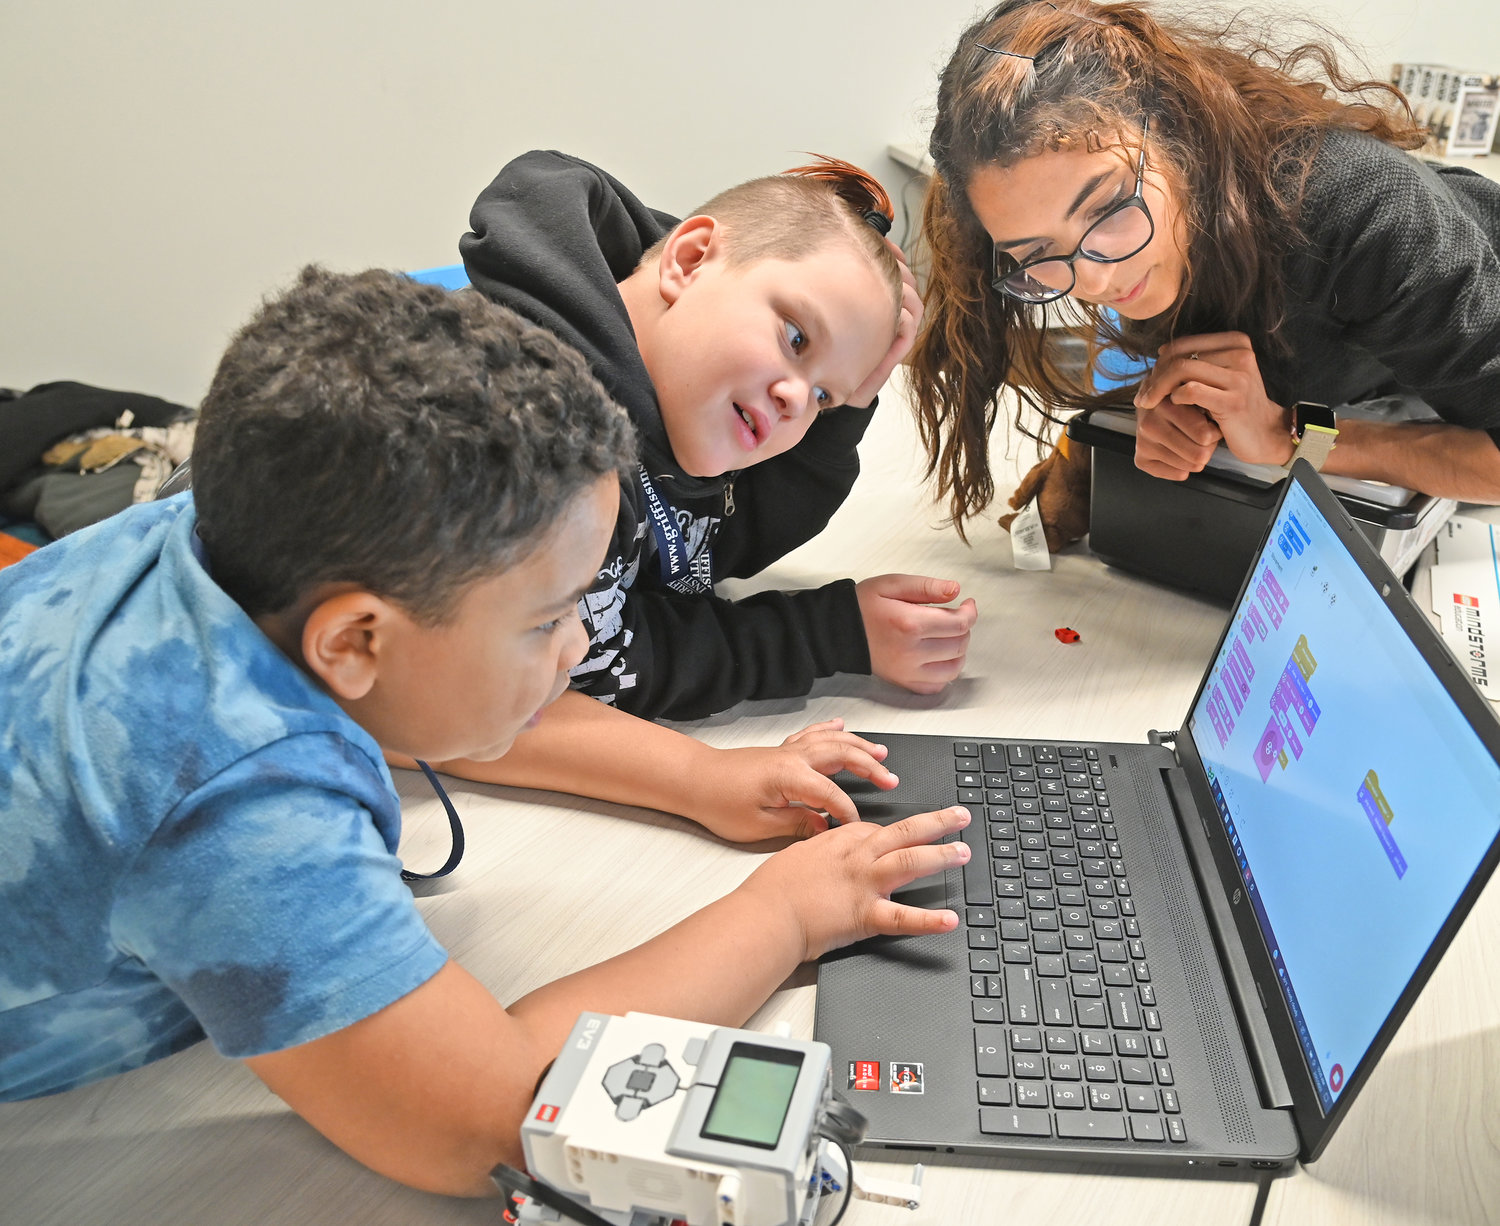 Mohawk Valley Community College Adjunct Professor Jessica Dubois. right, works with fourth graders Dante Johnson, left, and Wyatt Aldridge Tuesday, Feb. 21, at Griffiss Institute’s Robotics Camp in Rome.